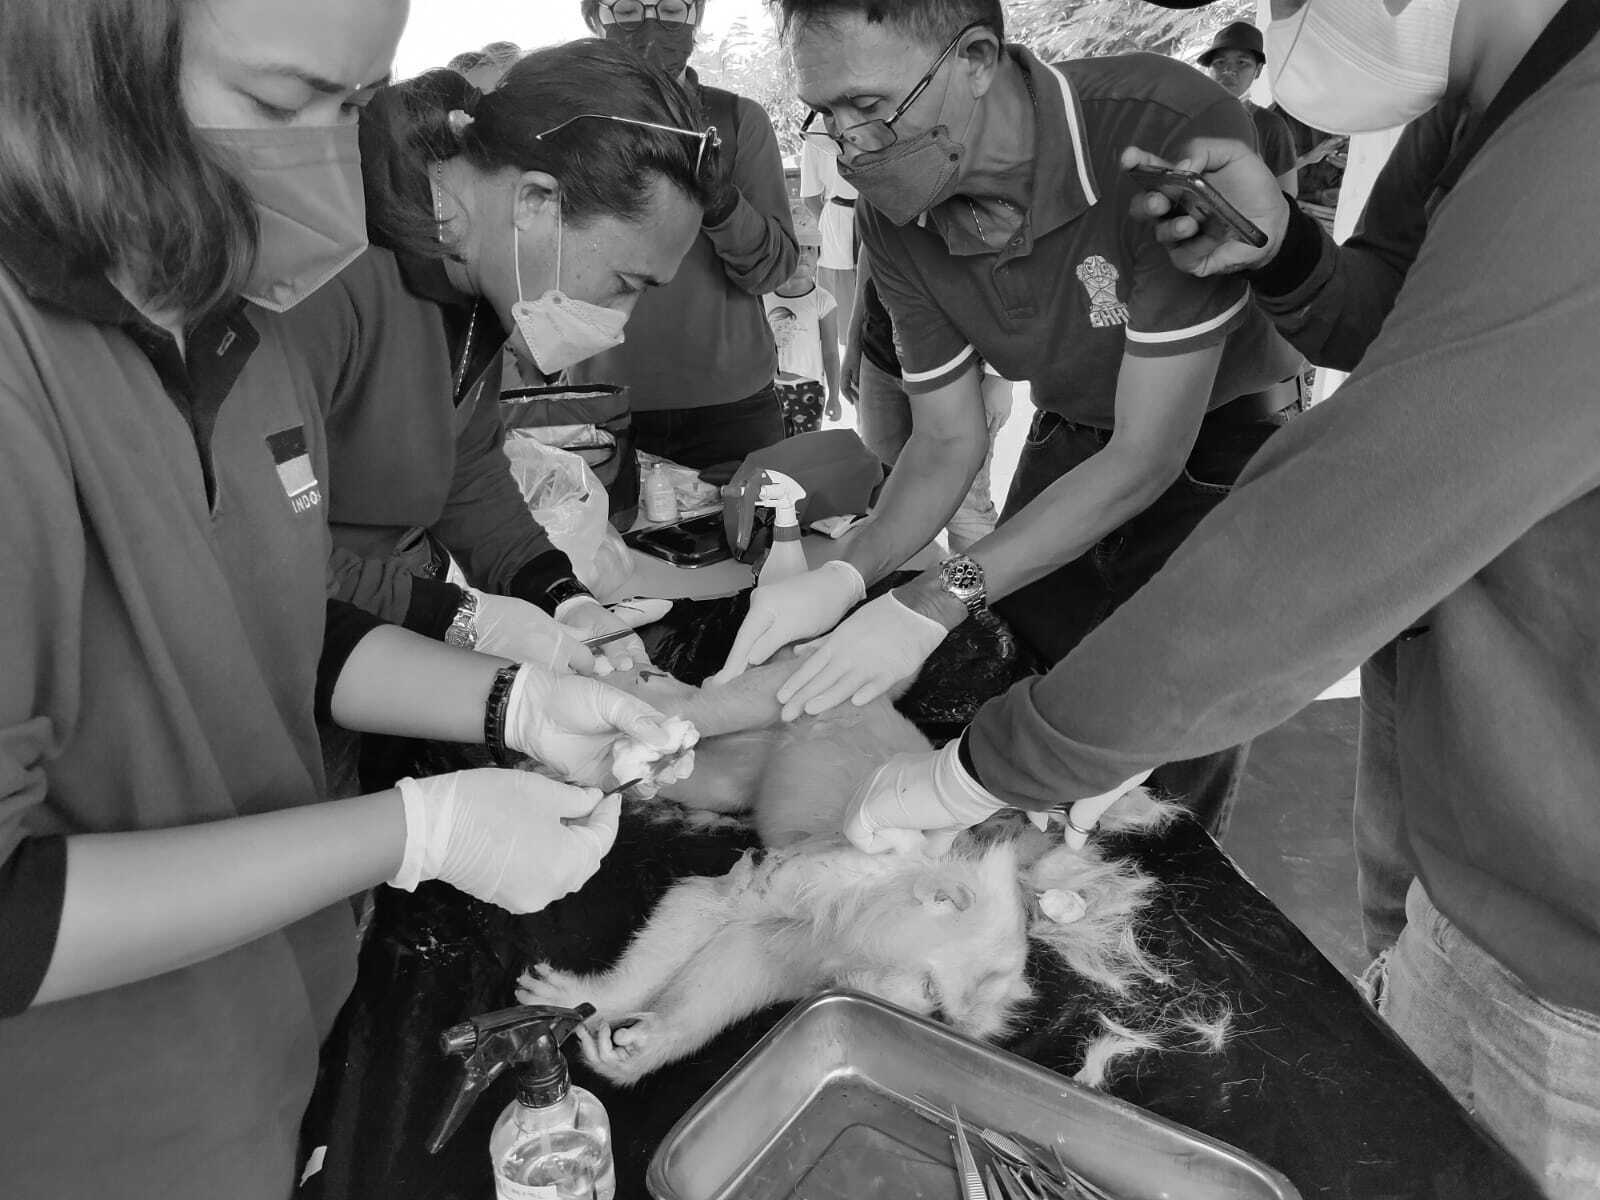 Collaboration between FMV UNUD and Ikayana Vet to control the monkey population through vasectomy and wound treatment on white monkeys in the South Kuta area